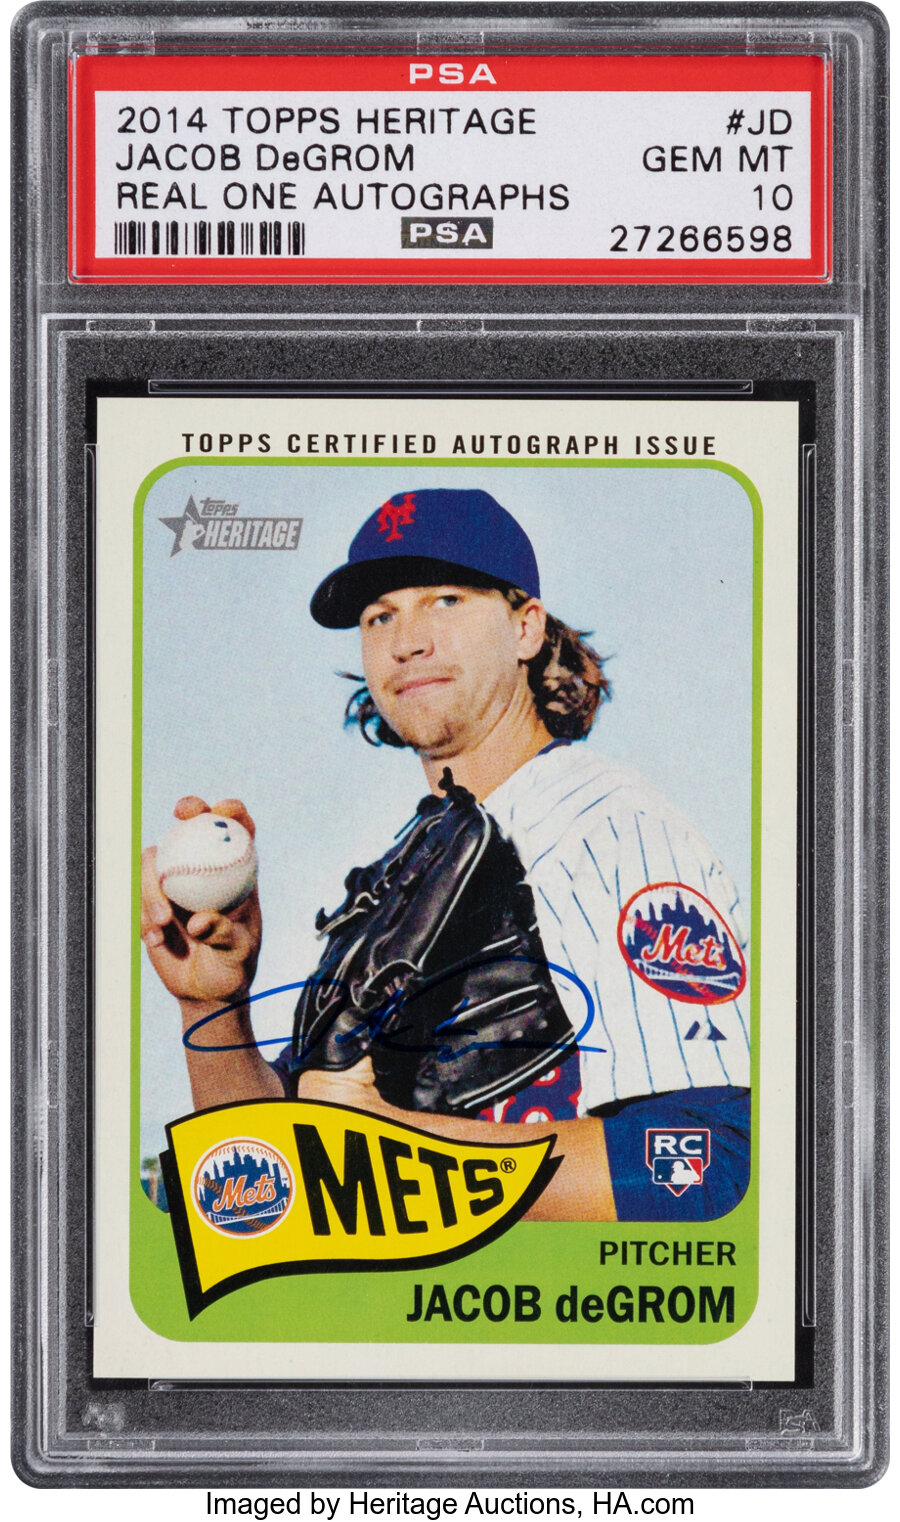 2014 Topps Heritage Jacob deGrom (Real One Autographs) Rookie #JD PSA Gem Mint 10